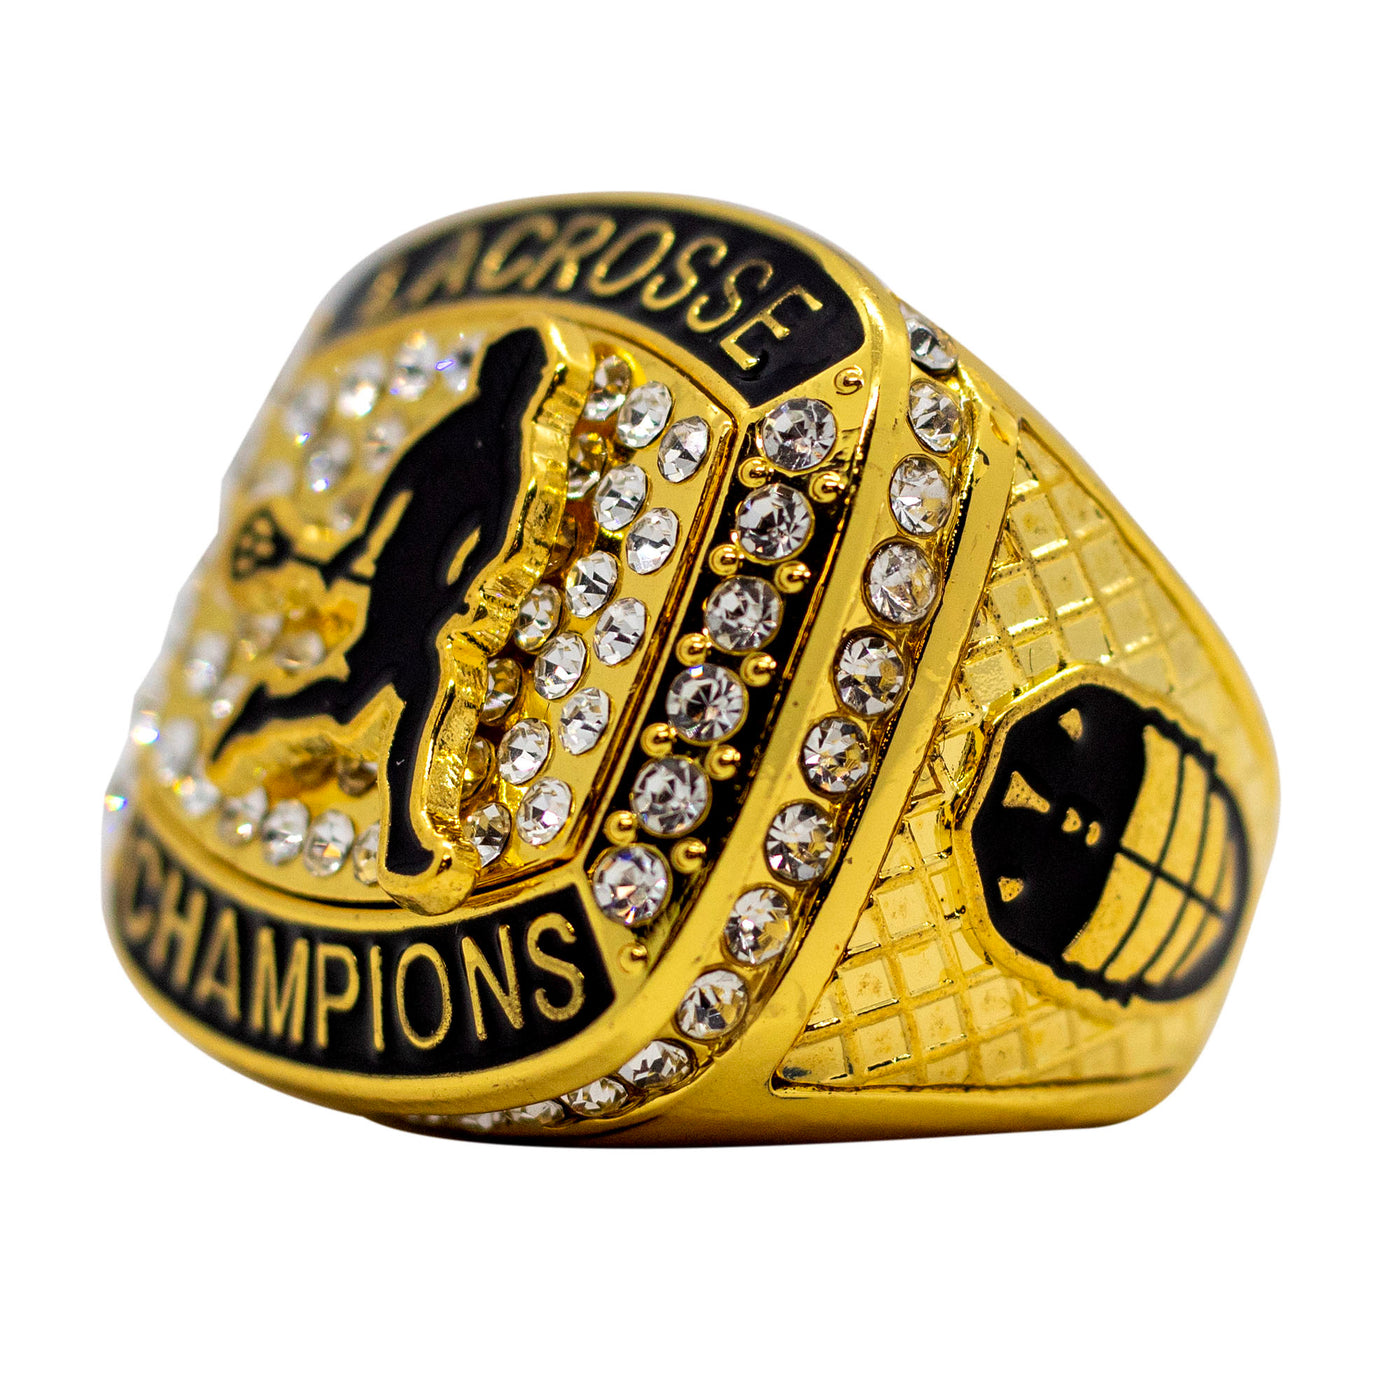 Lacrosse Gold Champions Ring